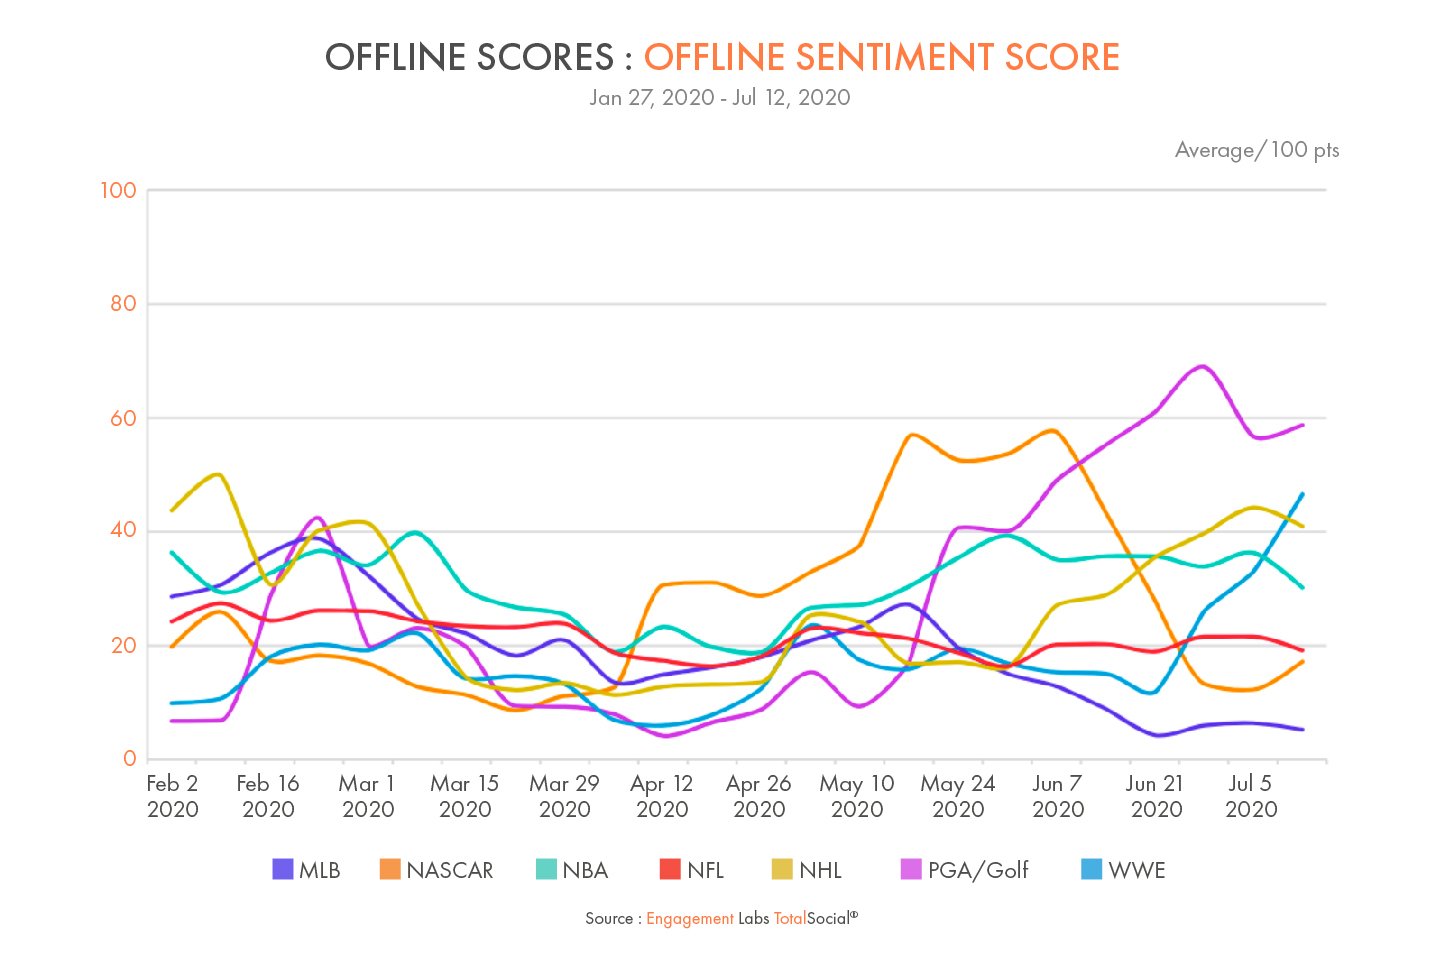 RETURN TO PLAY DROVE UP SENTIMENT FOR NASCAR, GOLF, WWE